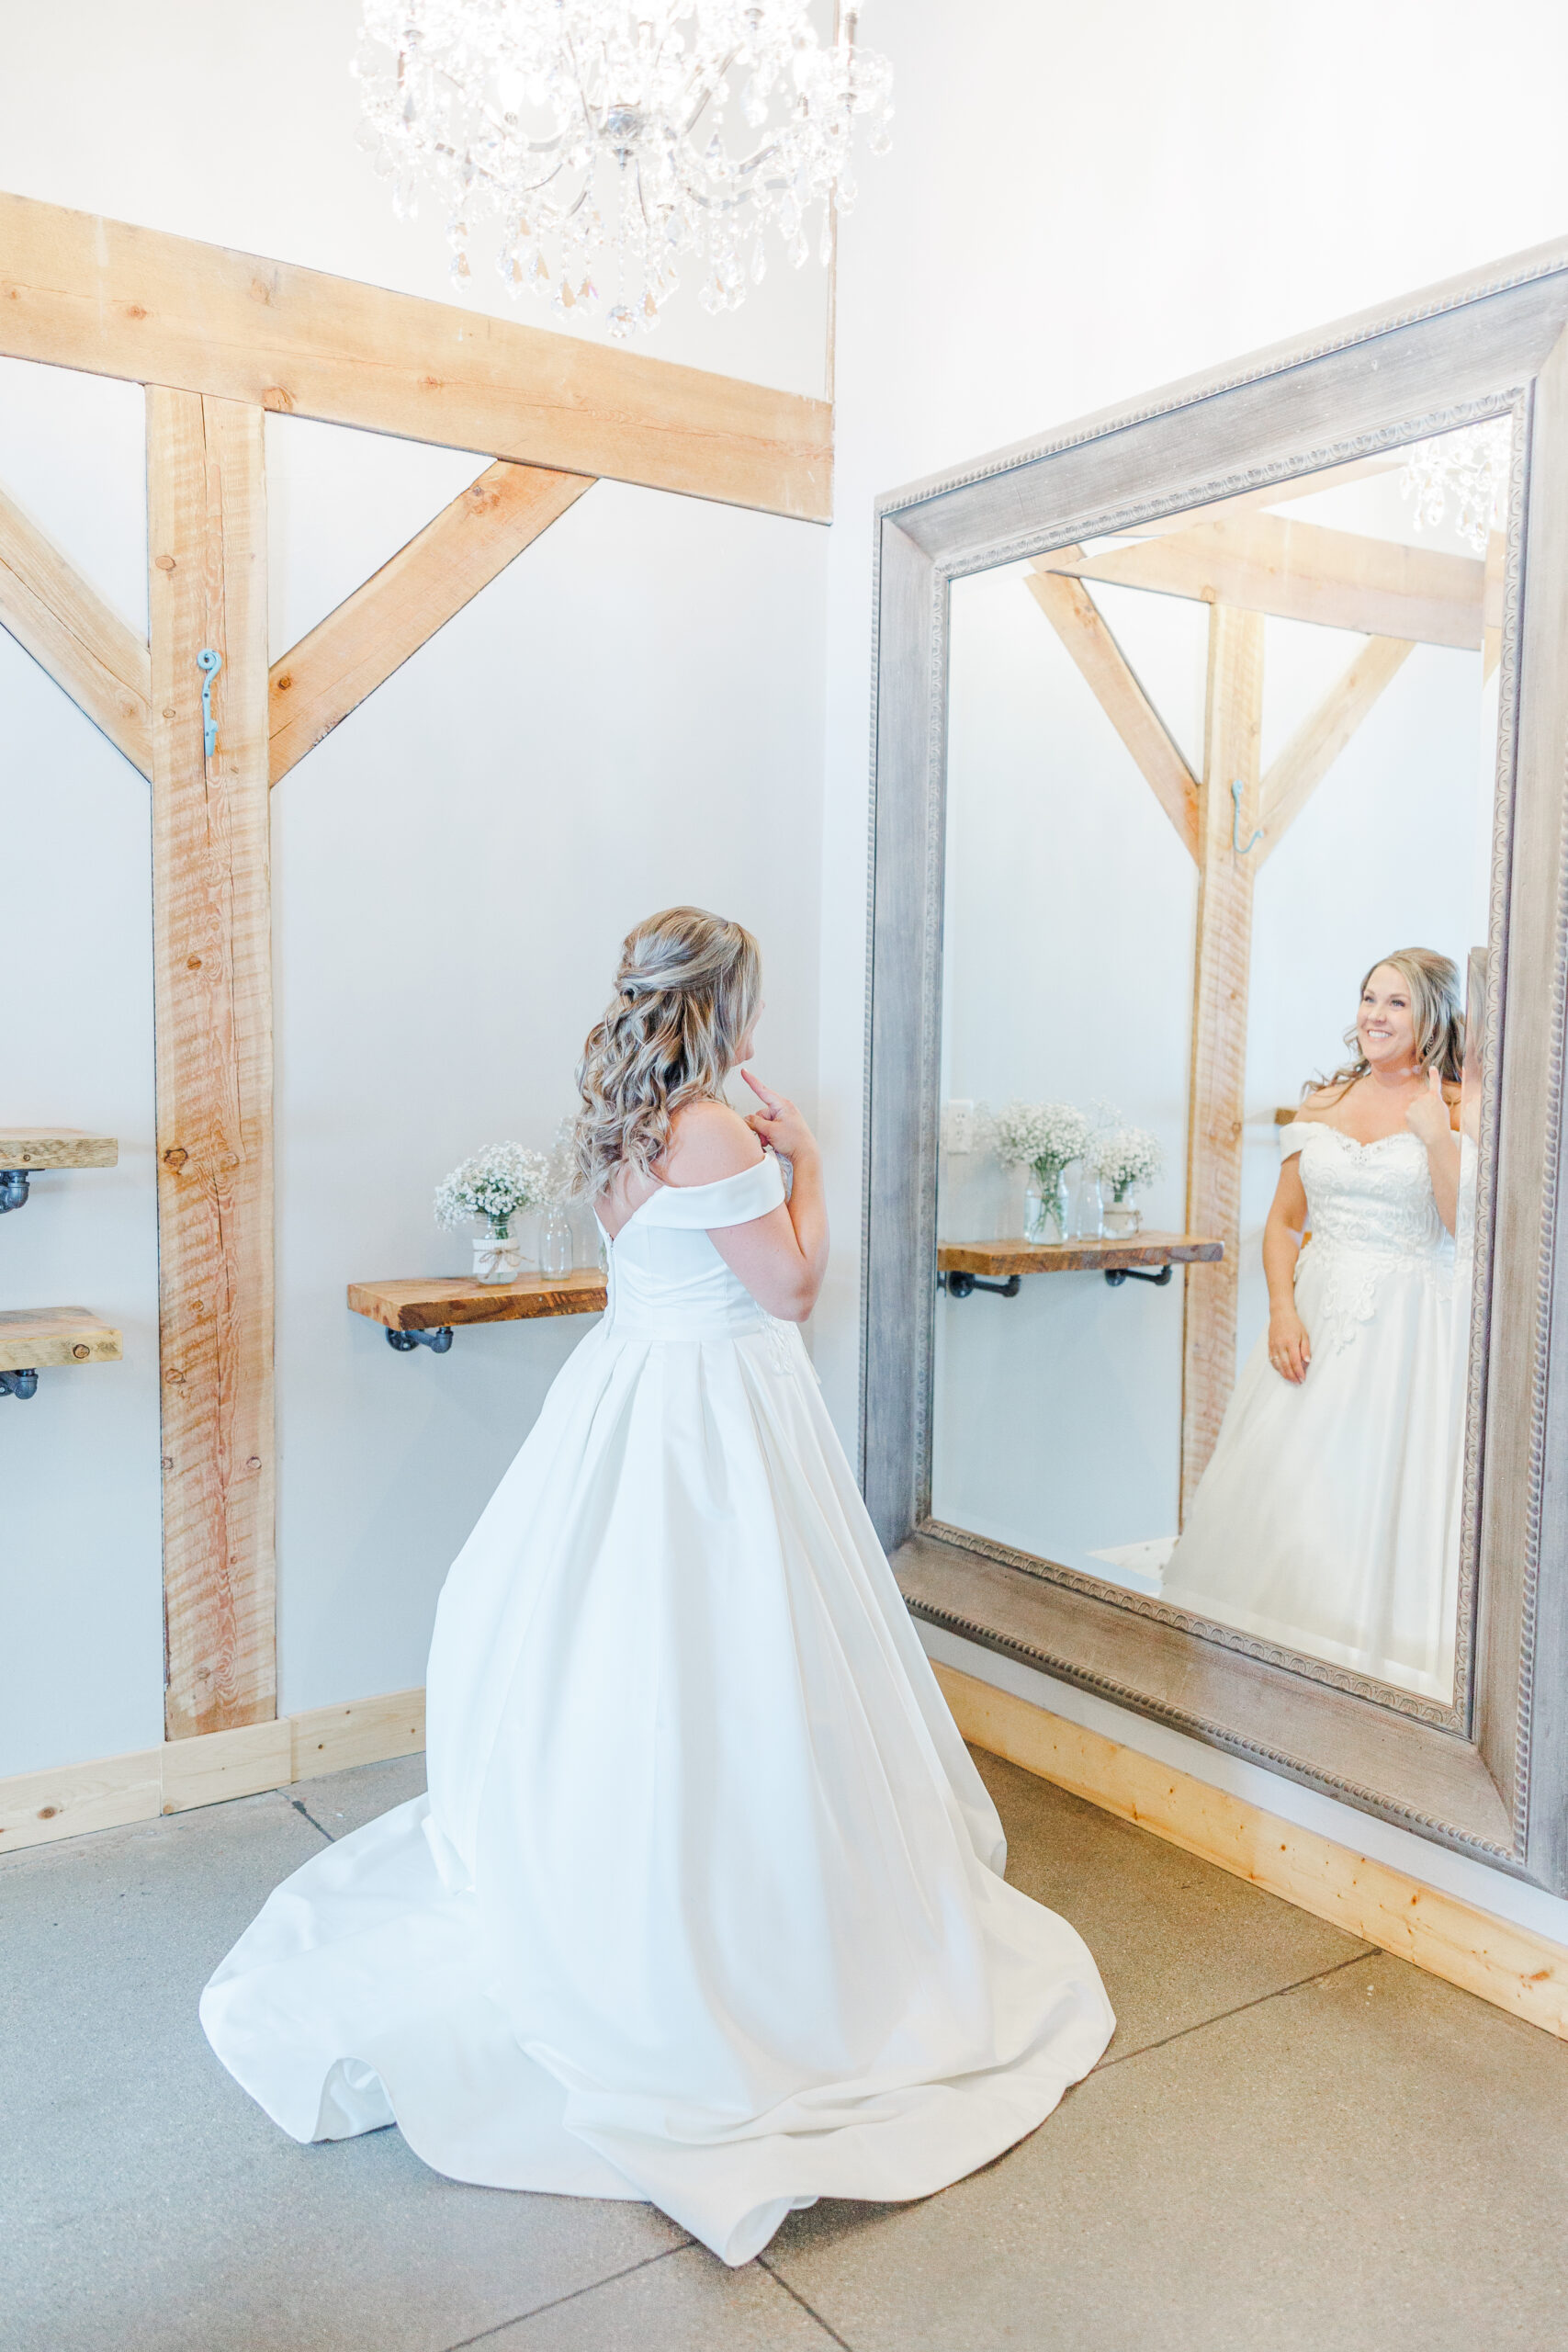 Bride taking getting ready photos inside the bridal suite at The Meadow Barn at Country Orchard Wedding